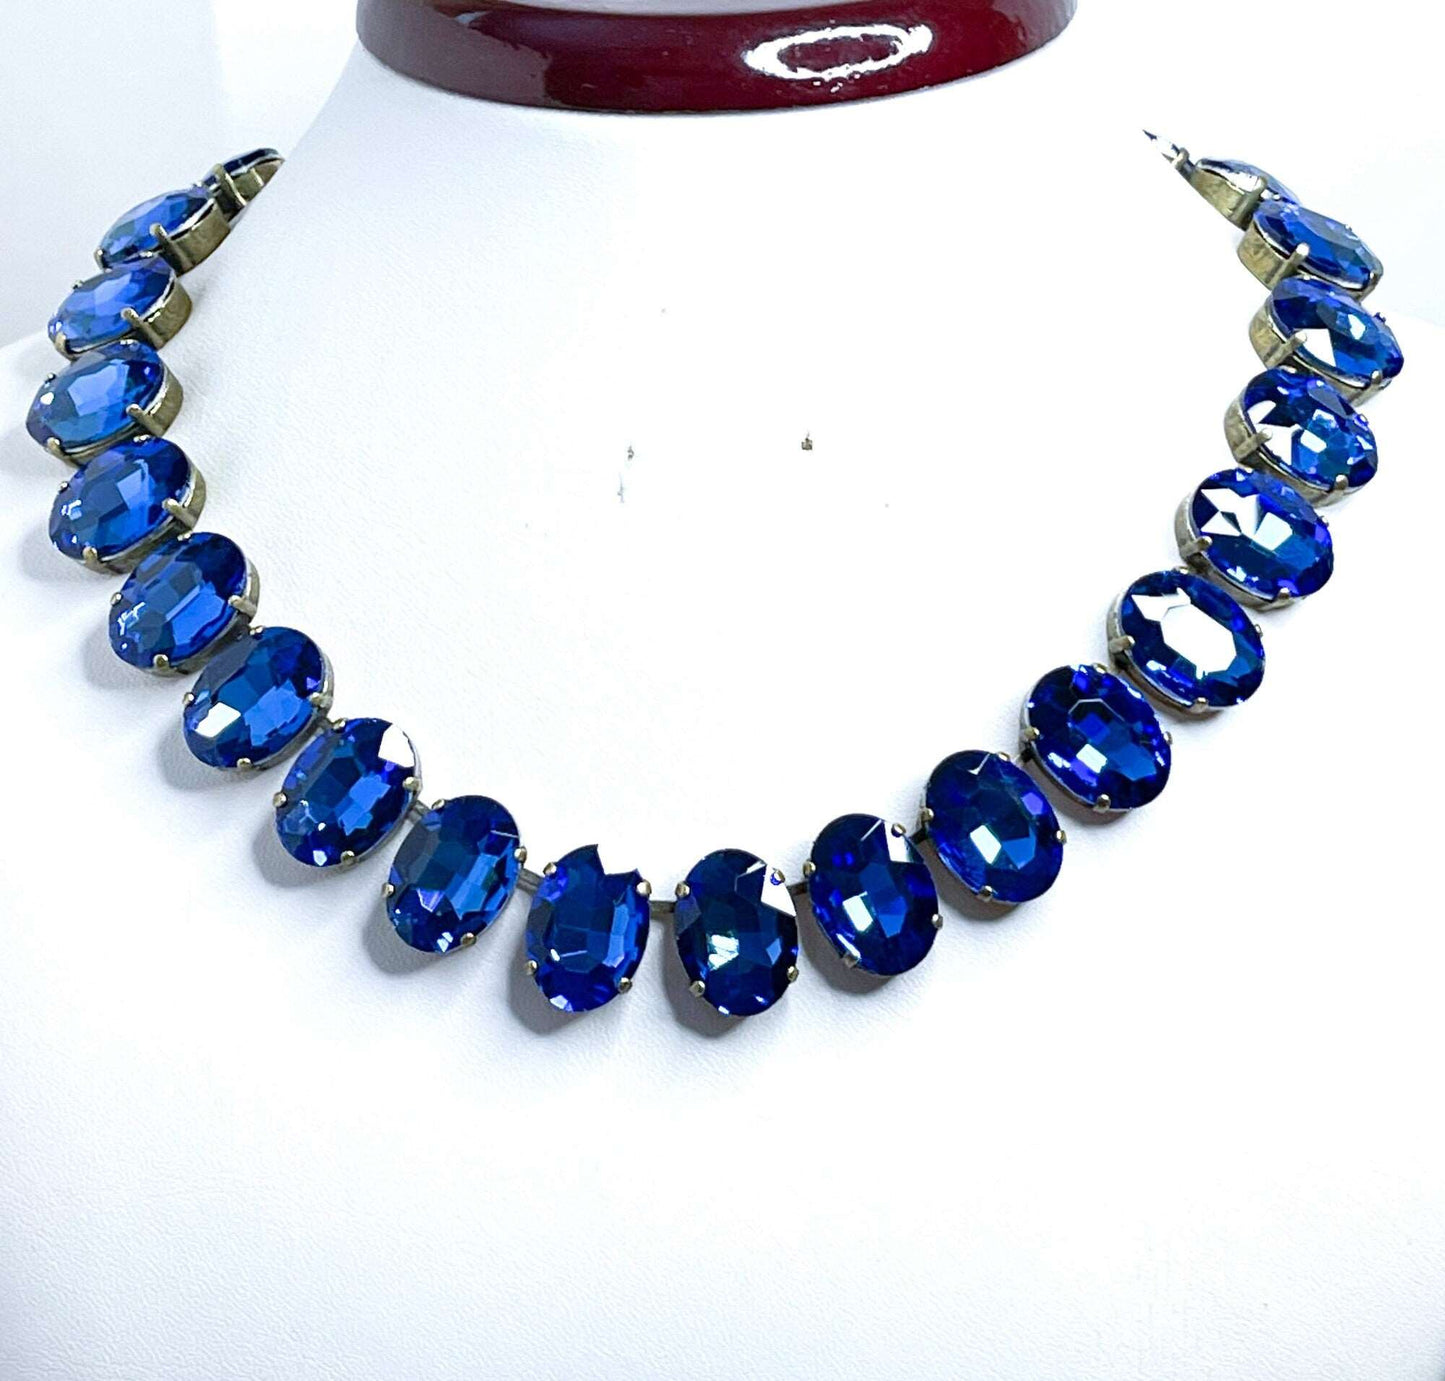 Anna Wintour Necklace, Sapphire Oval Georgian Collet, Crystal Choker, Blue Riviere Necklace, Statement Choker, Necklaces for Women